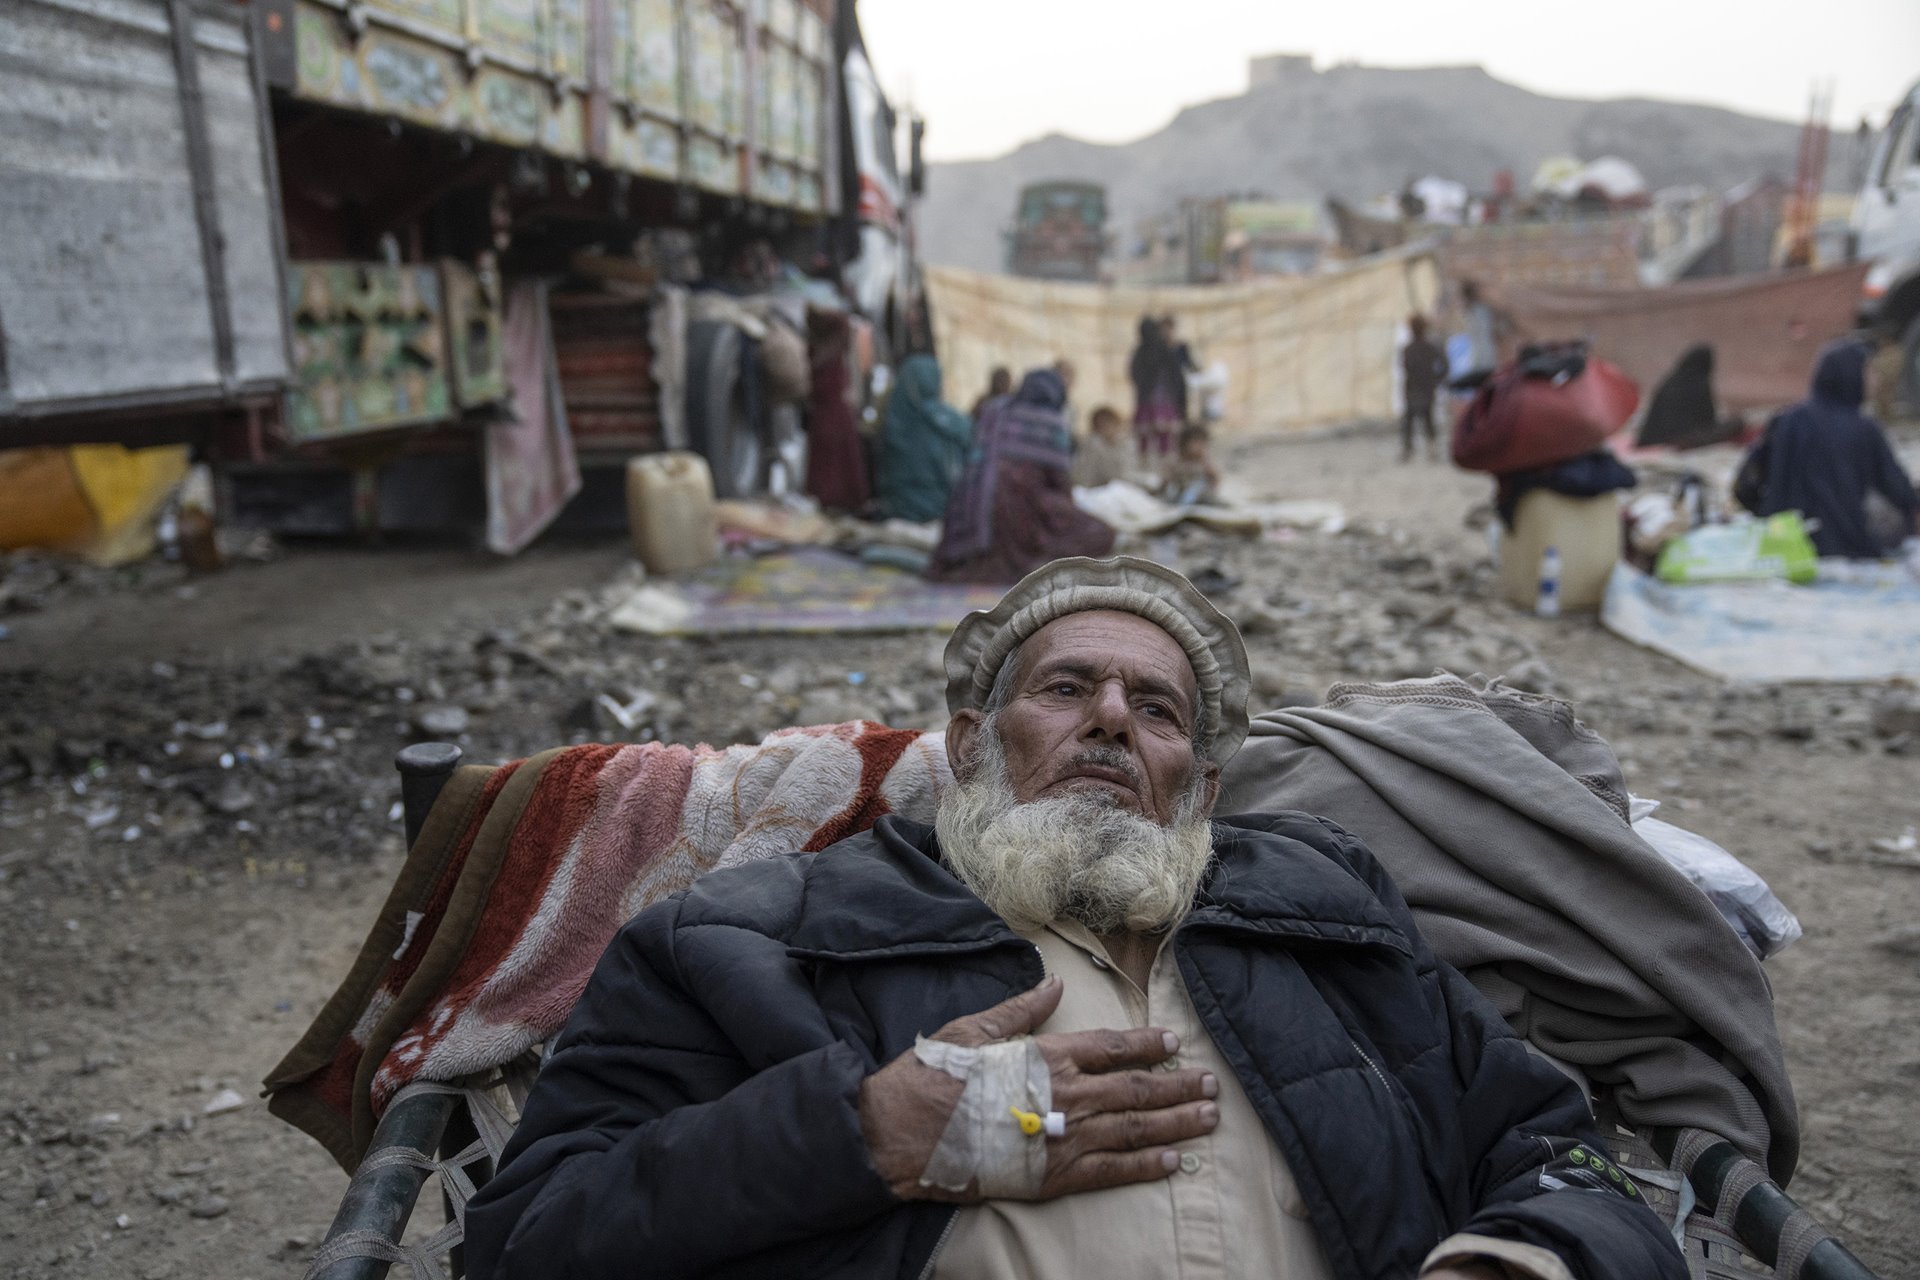 A sick man is treated in a camp for people recently deported from Pakistan in Torkham, Afghanistan, a town split in half by the Pakistan-Afghanistan border, three days after Pakistan&rsquo;s deadline for the expulsion of undocumented Afghans. Around 490,000 refugees crossed the border in the weeks preceding the 1 November deadline.